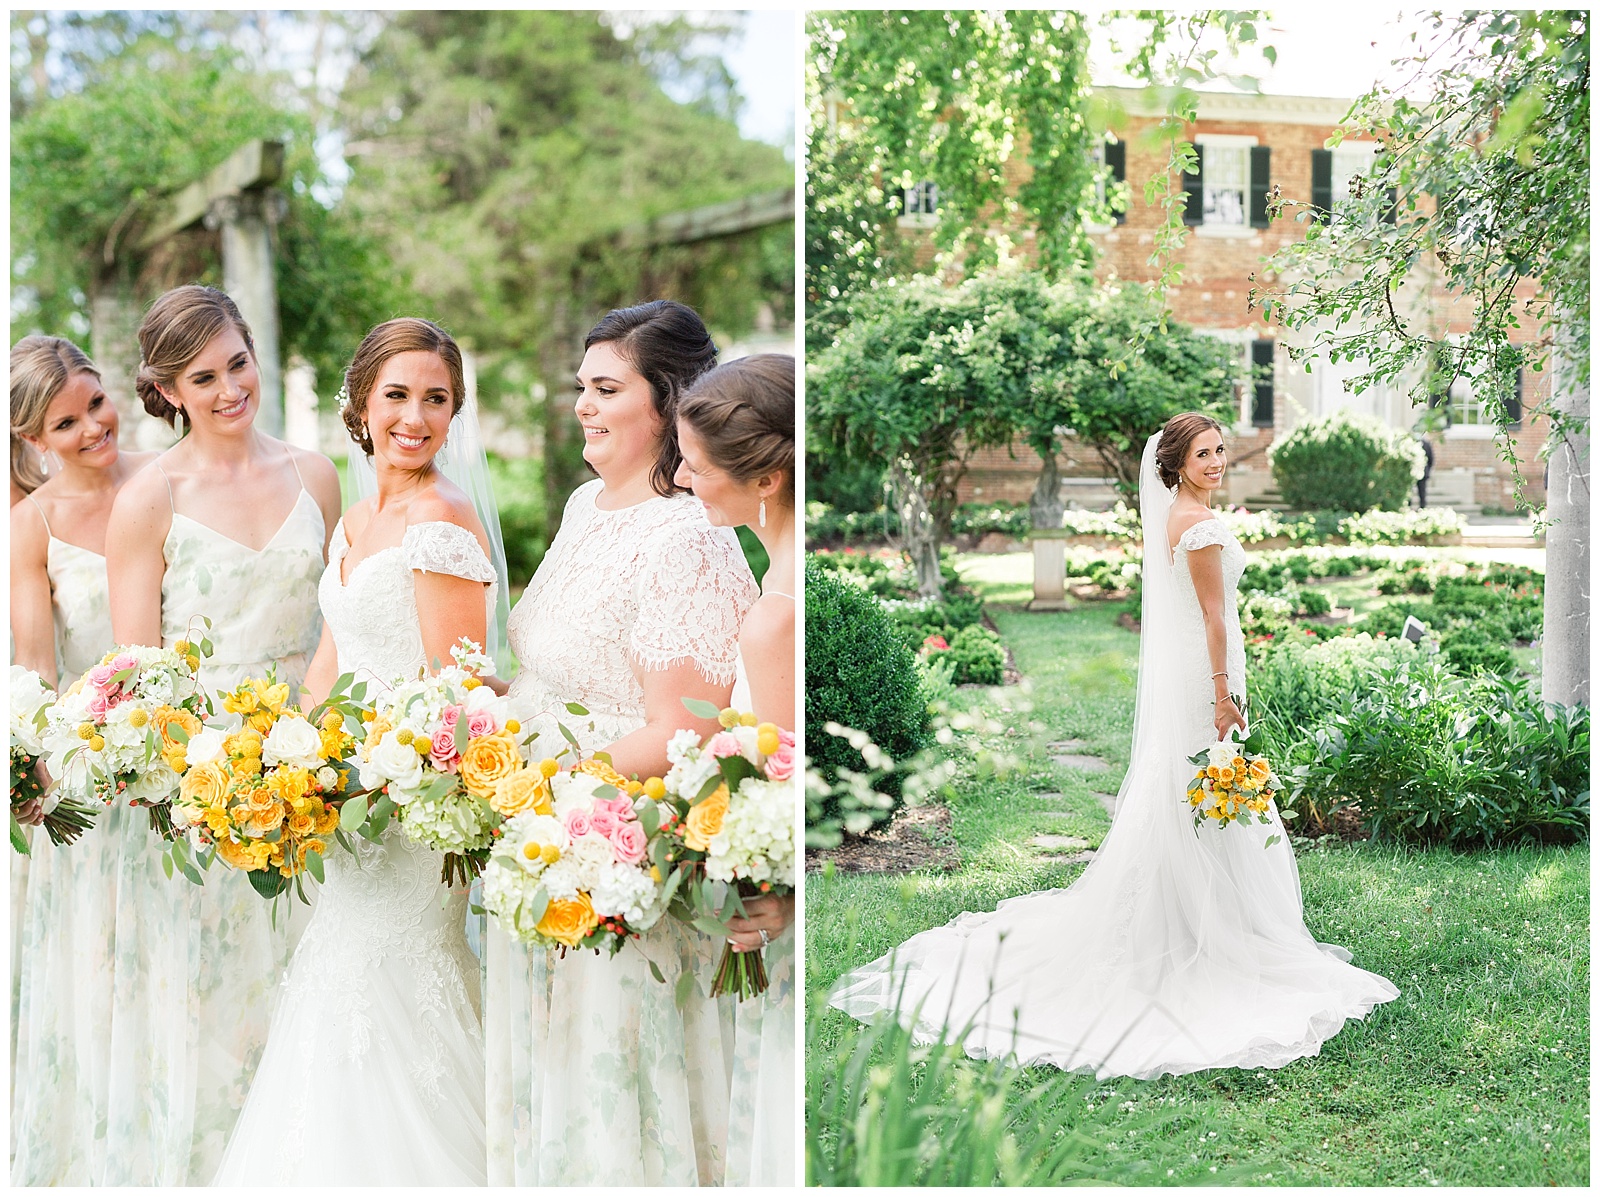 Bride + Bridesmaids in Chatham Manor Garden wearing white floral dresses and yellow bouquets in front of the historic Fredericksburg Mansion